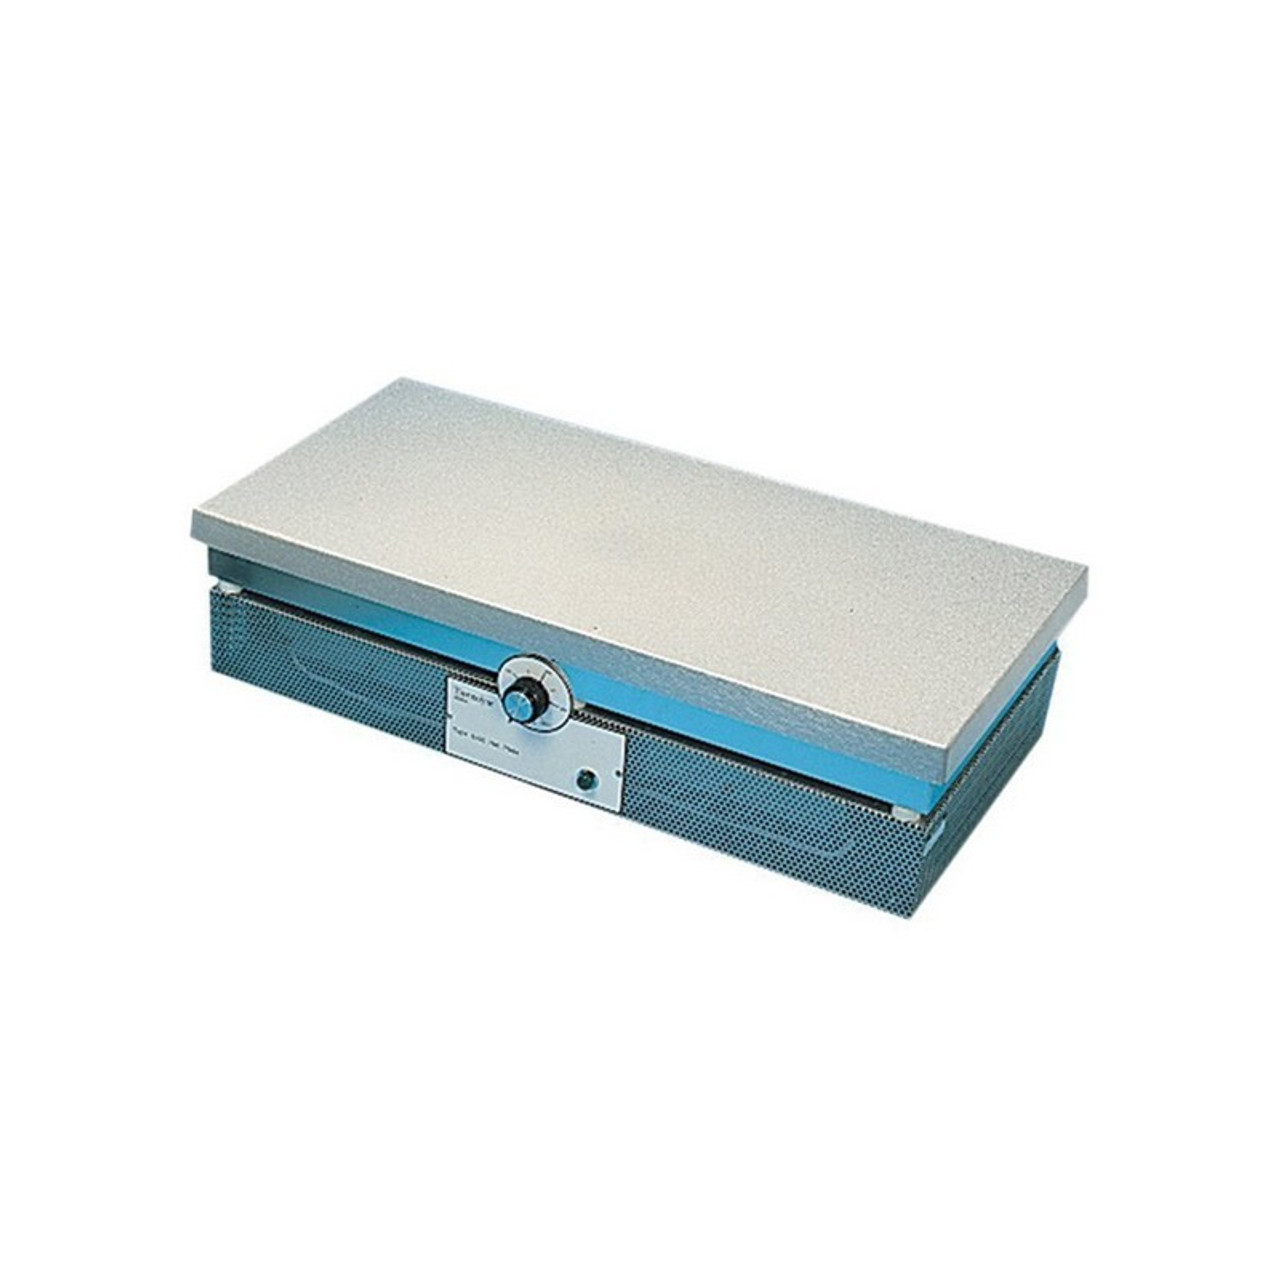 https://cdn11.bigcommerce.com/s-48gxyyxkag/images/stencil/1280x1280/products/20865/54040/hpa2240mq_large_aluminum_top_hotplate__06719.1660332145.jpg?c=1